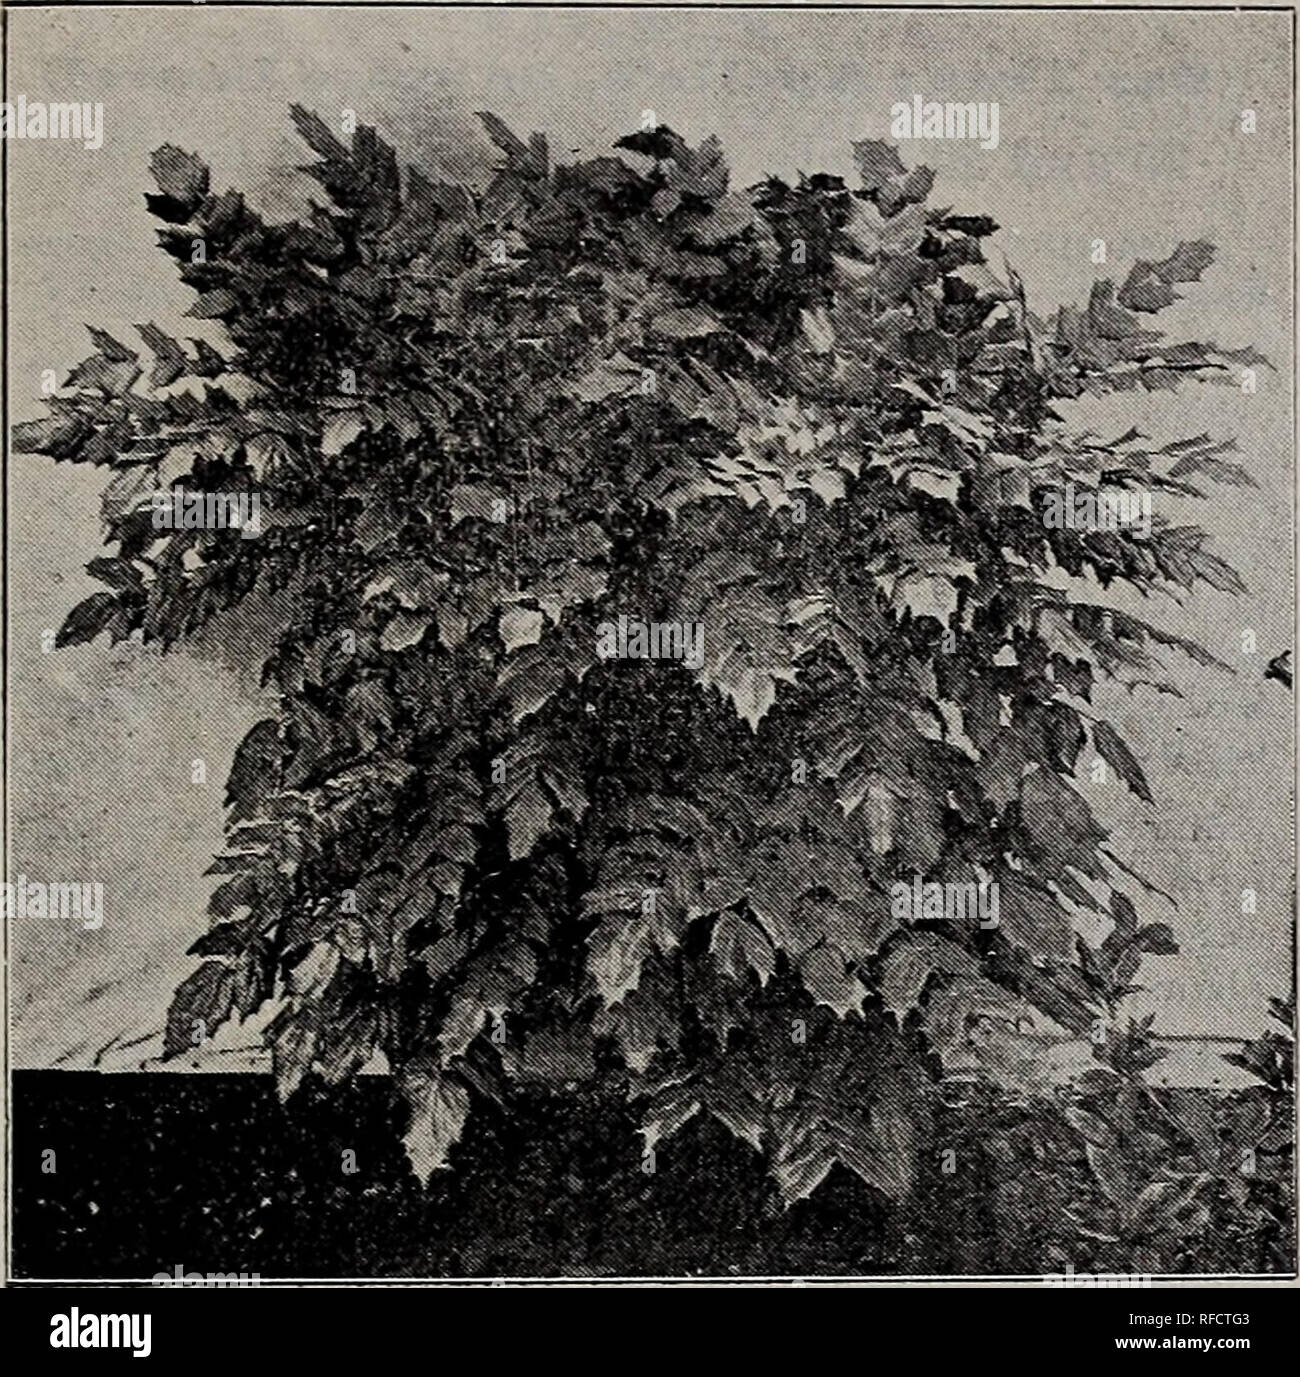 . Fruitland Nurseries. Nursery stock, Georgia, Augusta, Catalogs; Fruit trees, Seedlings, Catalogs; Fruit, Catalogs; Trees, Seedlings, Catalogs; Plants, Ornamental, Catalogs; Shrubs, Catalogs; Flowers, Catalogs. ORNAMENTAL DEPARTMENT—Broad Leaved Evergreen Trees and Shrubs 27. BEKBEKIS JAPONICA. BERBERIS JAPONICA 25c. each, $2 for 10; large plants, 50c. each, $4 for 10. This splendid plant thrives best iu a shady situation, as on the north side of a liouse; foliage verj' broad, with 5 pairs of leaflets; flowers yellow, in long spikes, during February and March, followed by dark purple berries  Stock Photo